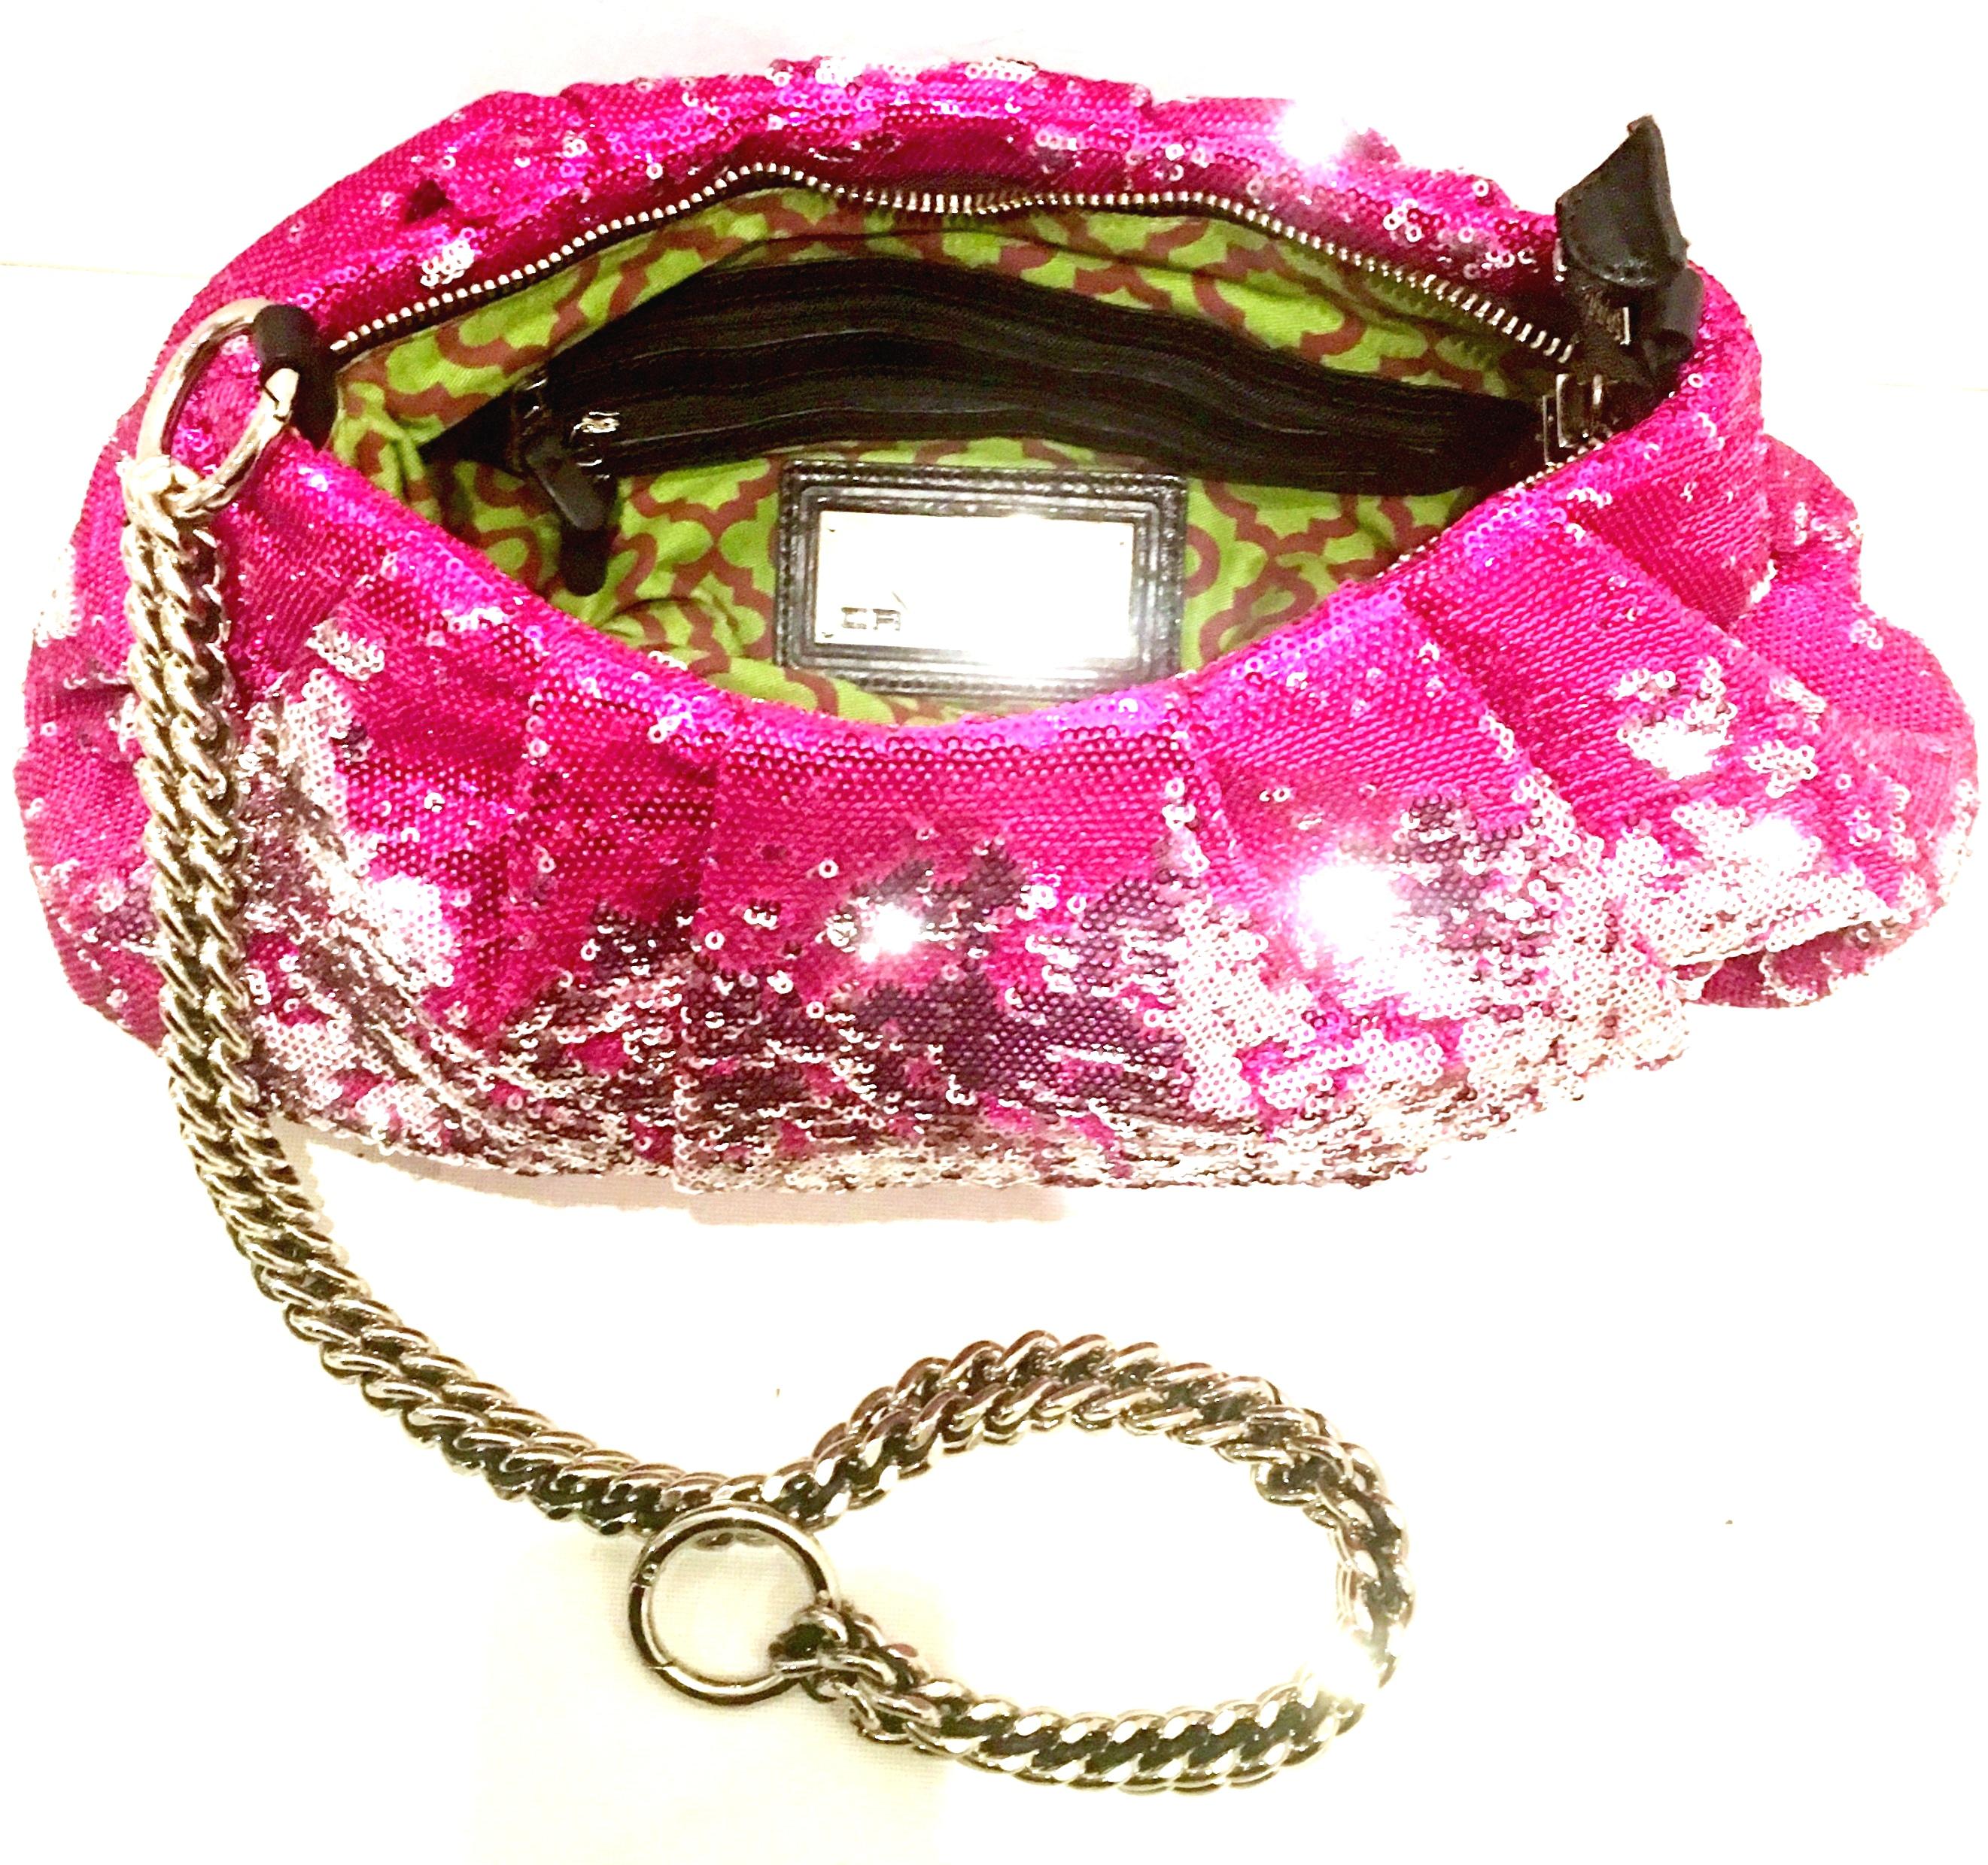 21st Century Contemporary Sequin, Leather & Chrome Hand Bag By, OrYanny 3